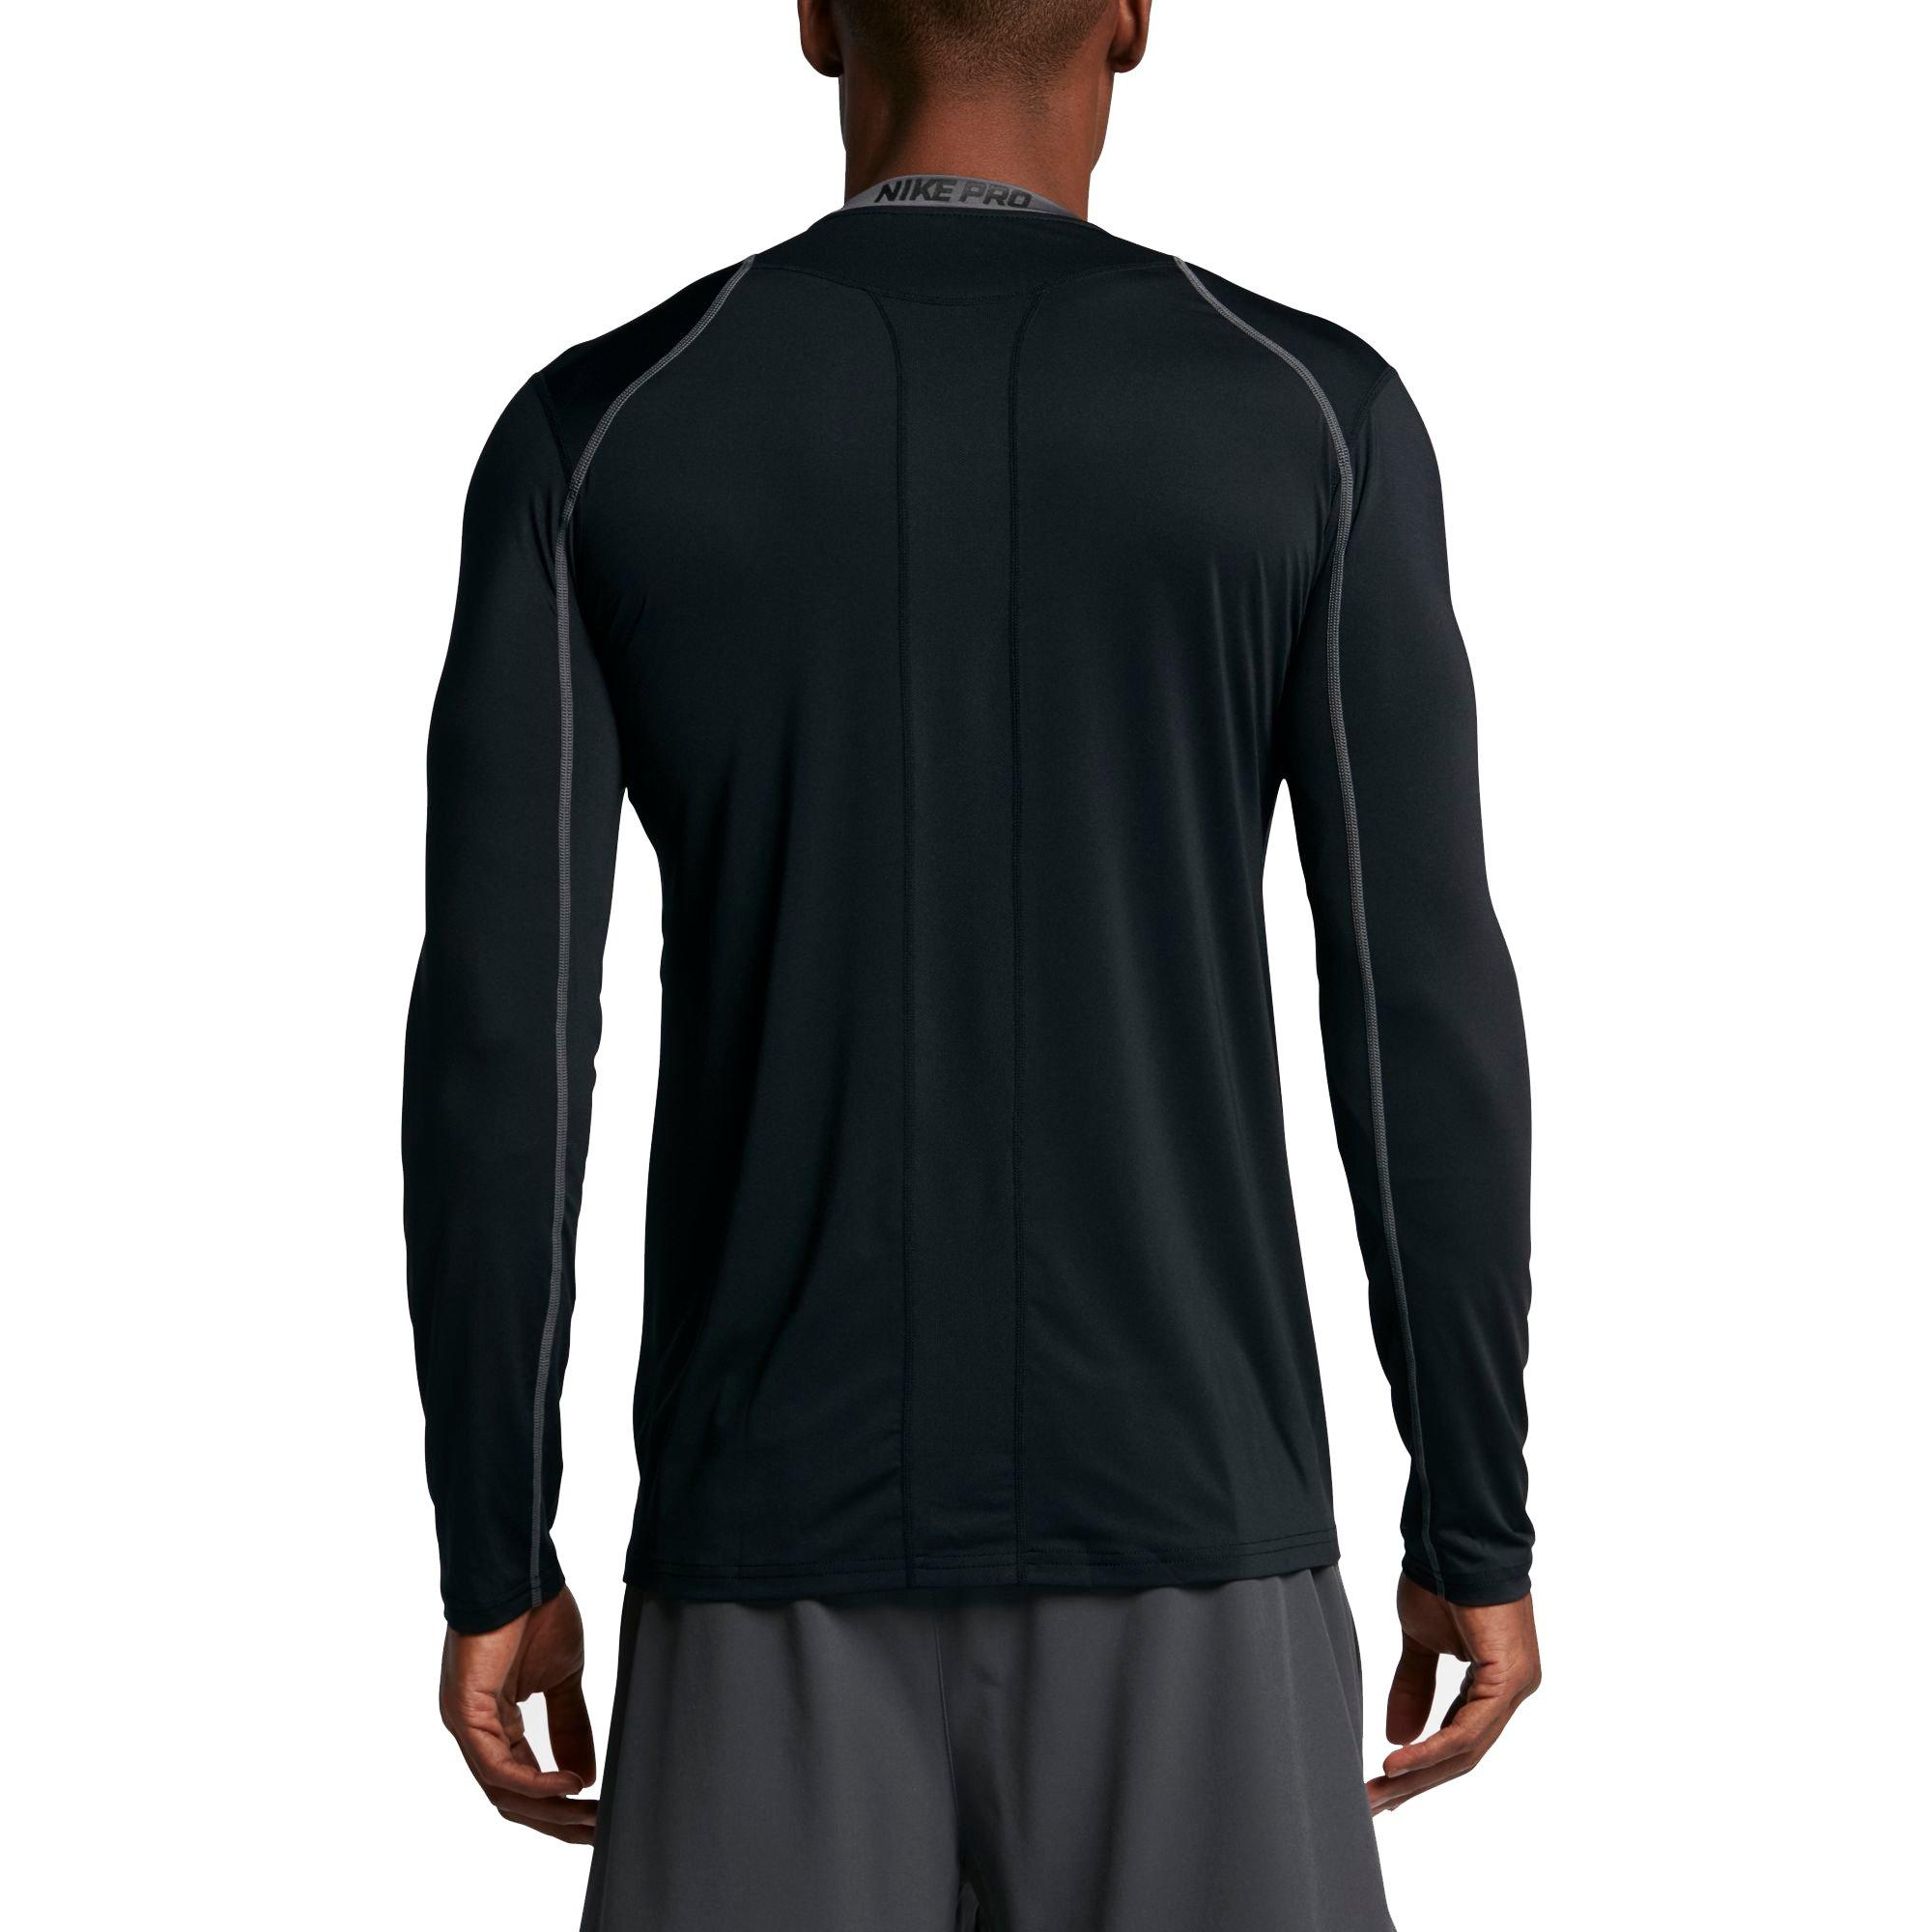 nike men's pro cool fitted long sleeve shirt